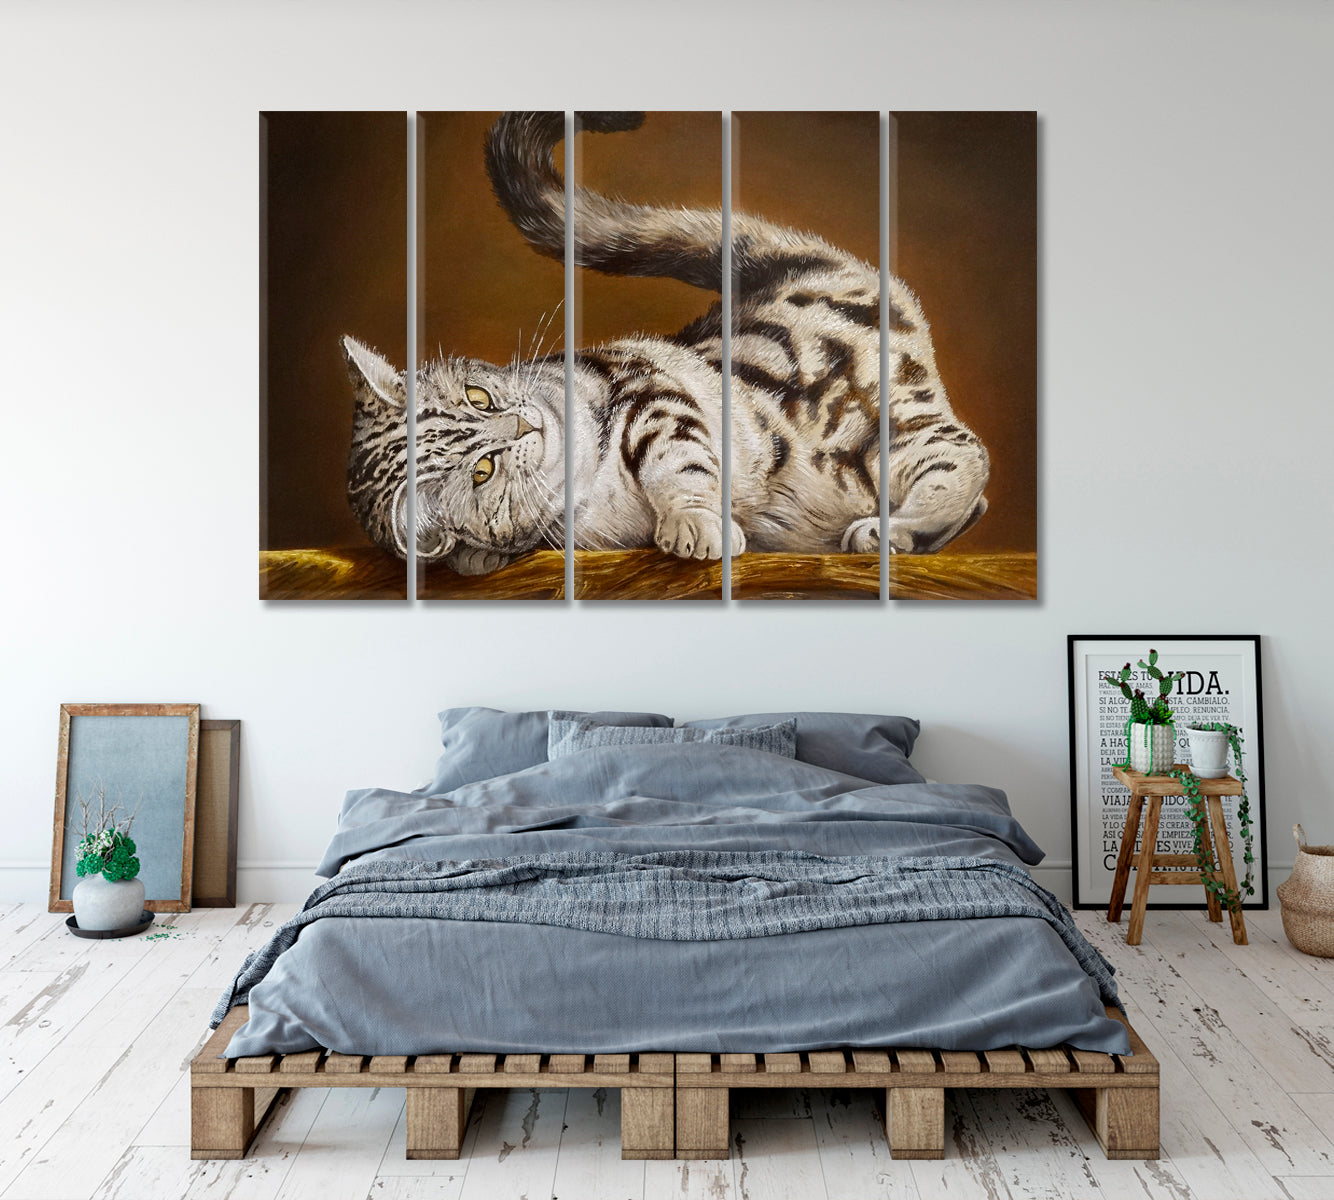 ADORABLE Cute Striped Cat Hot Look Whimsical Animals Fine Art Animals Canvas Print Artesty 5 panels 36" x 24" 